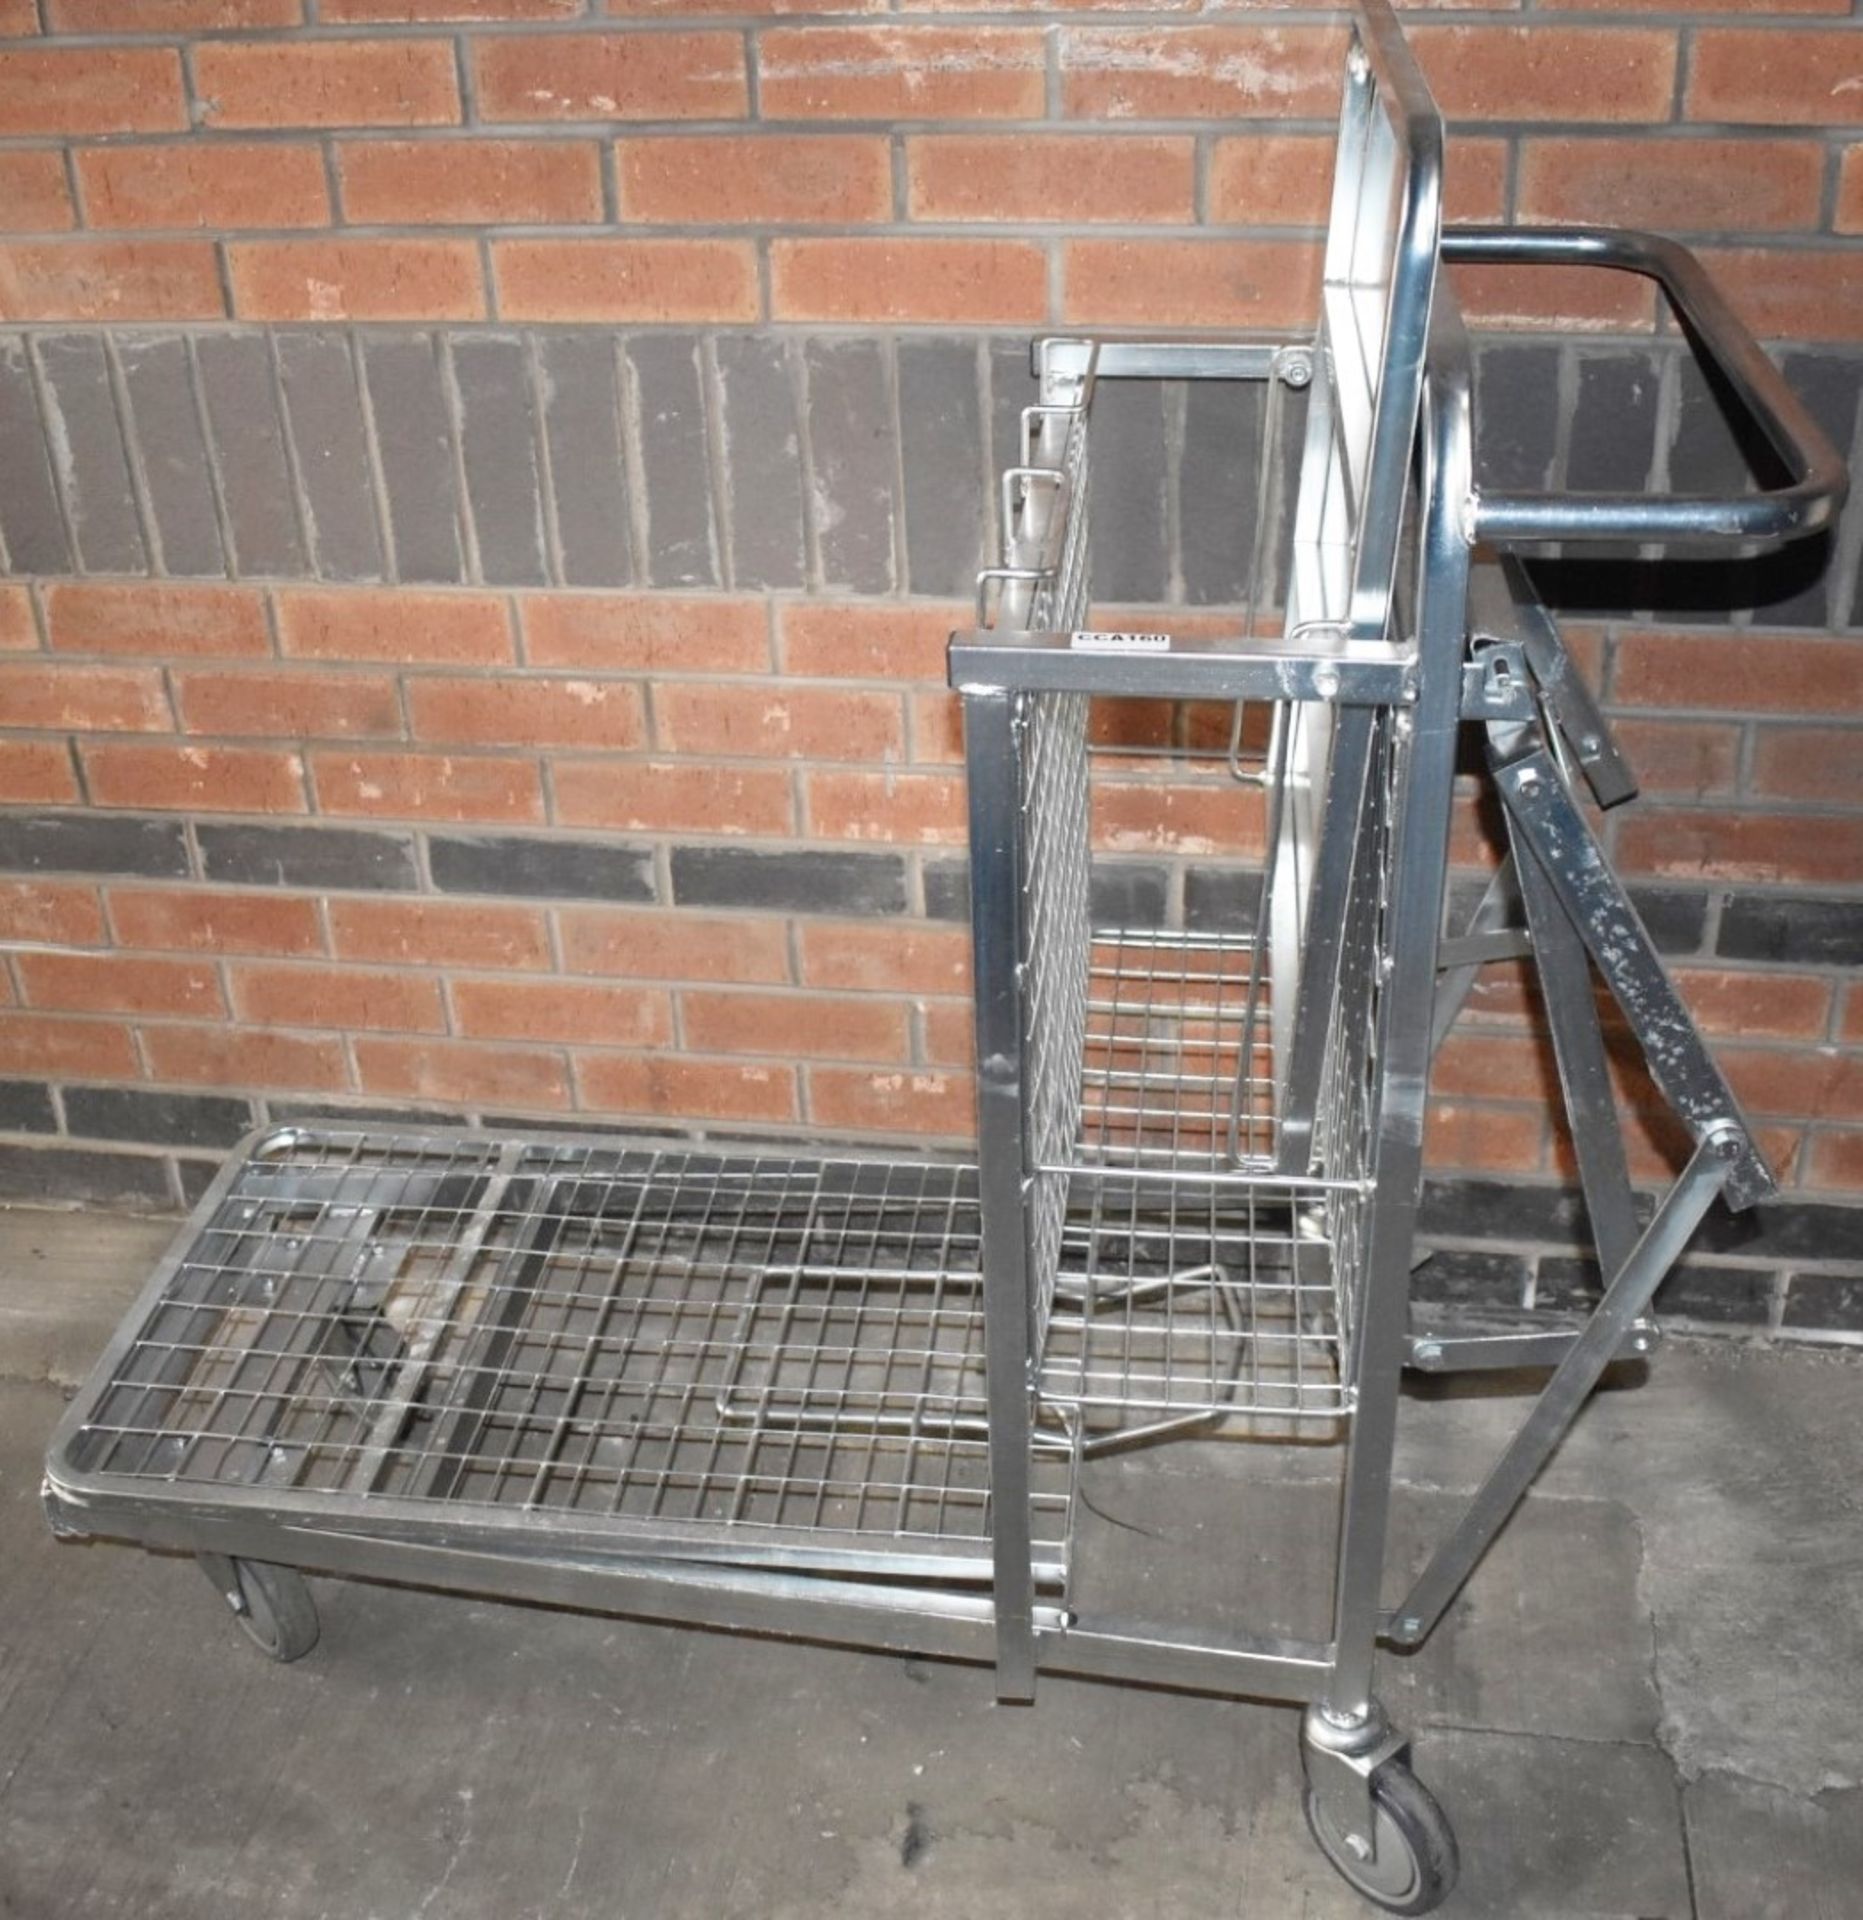 1 x Supermarket Retail Merchandising Trolley With Pull Out Step and Folding Shelf - Dimensions: